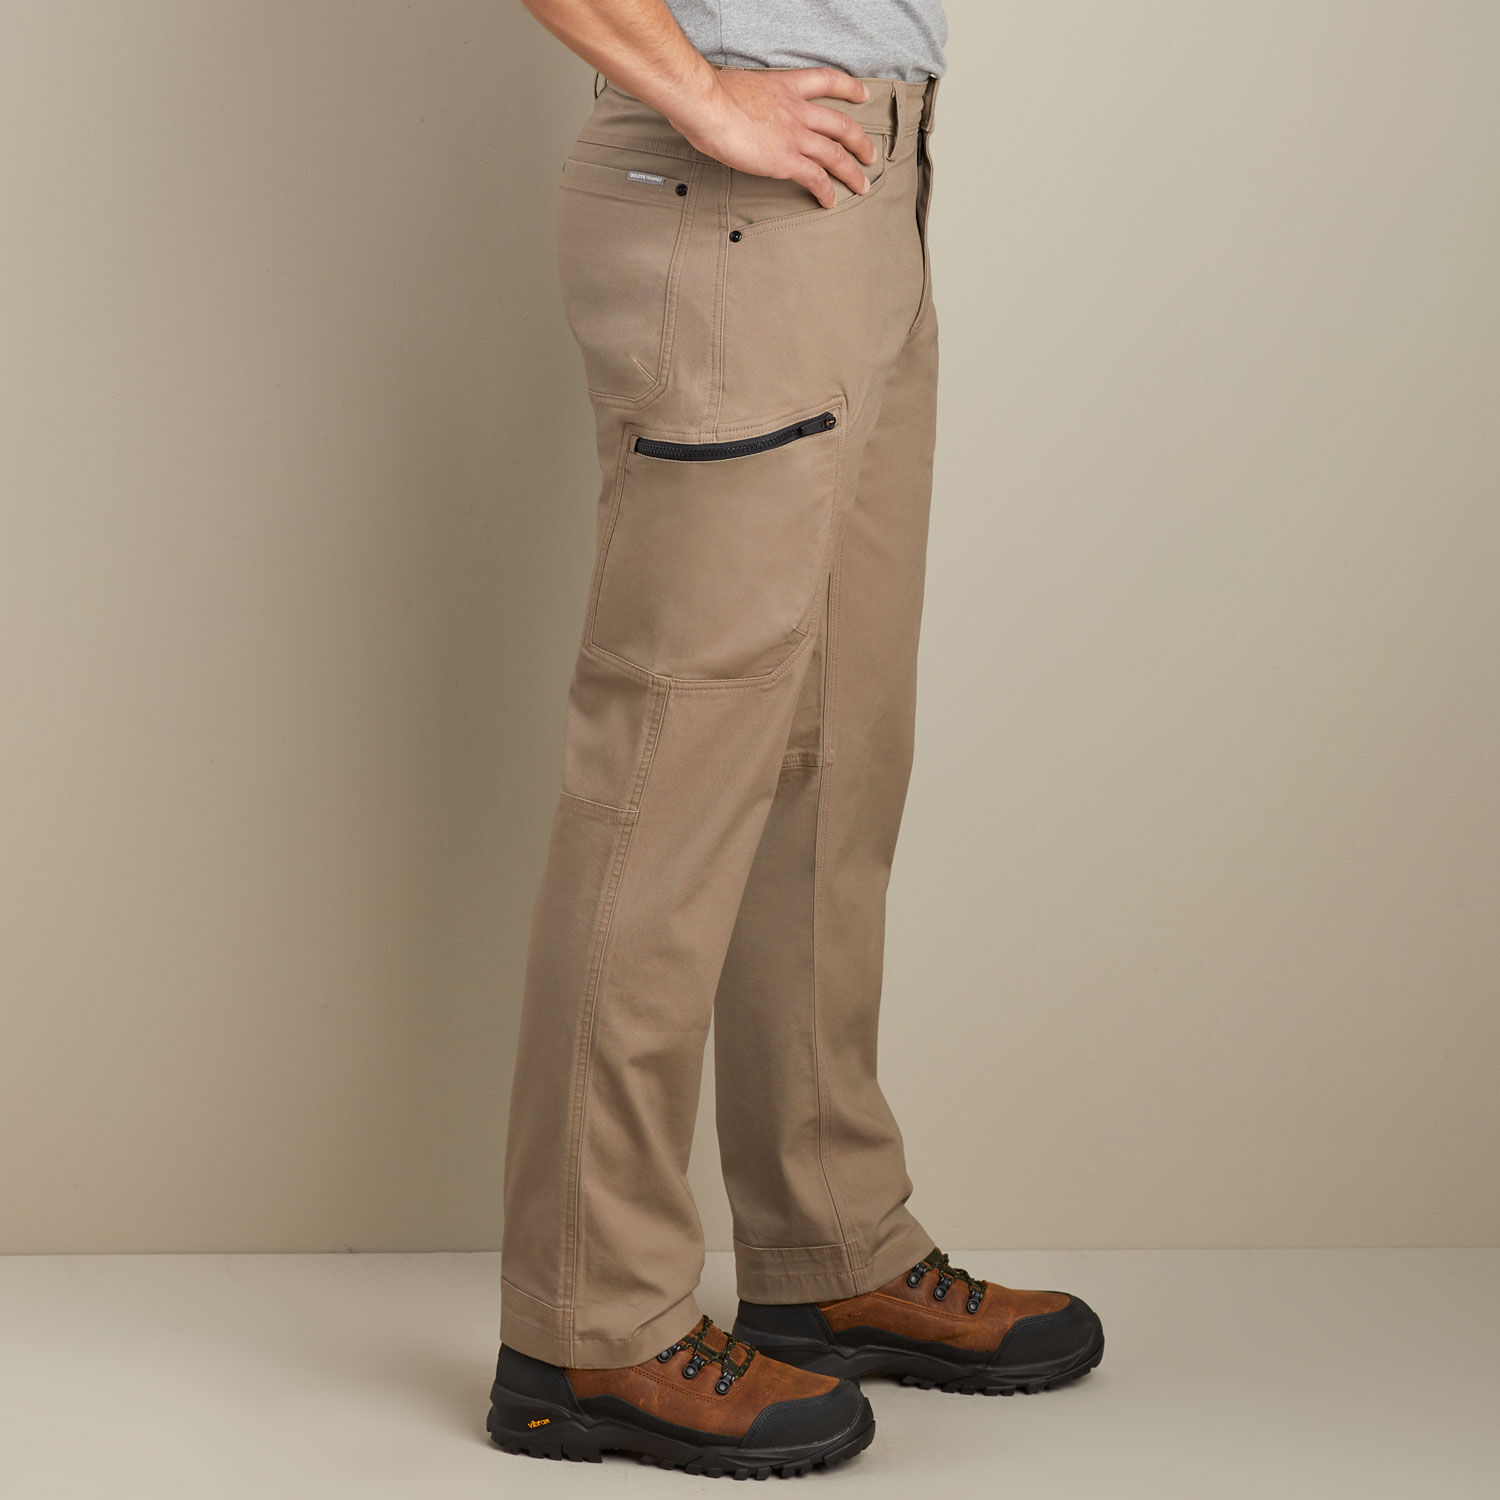 Duluth Trading Co Pants Mens 4832 Flex Fire Hose Cargo Brown Double Knee  Work  Inox Wind